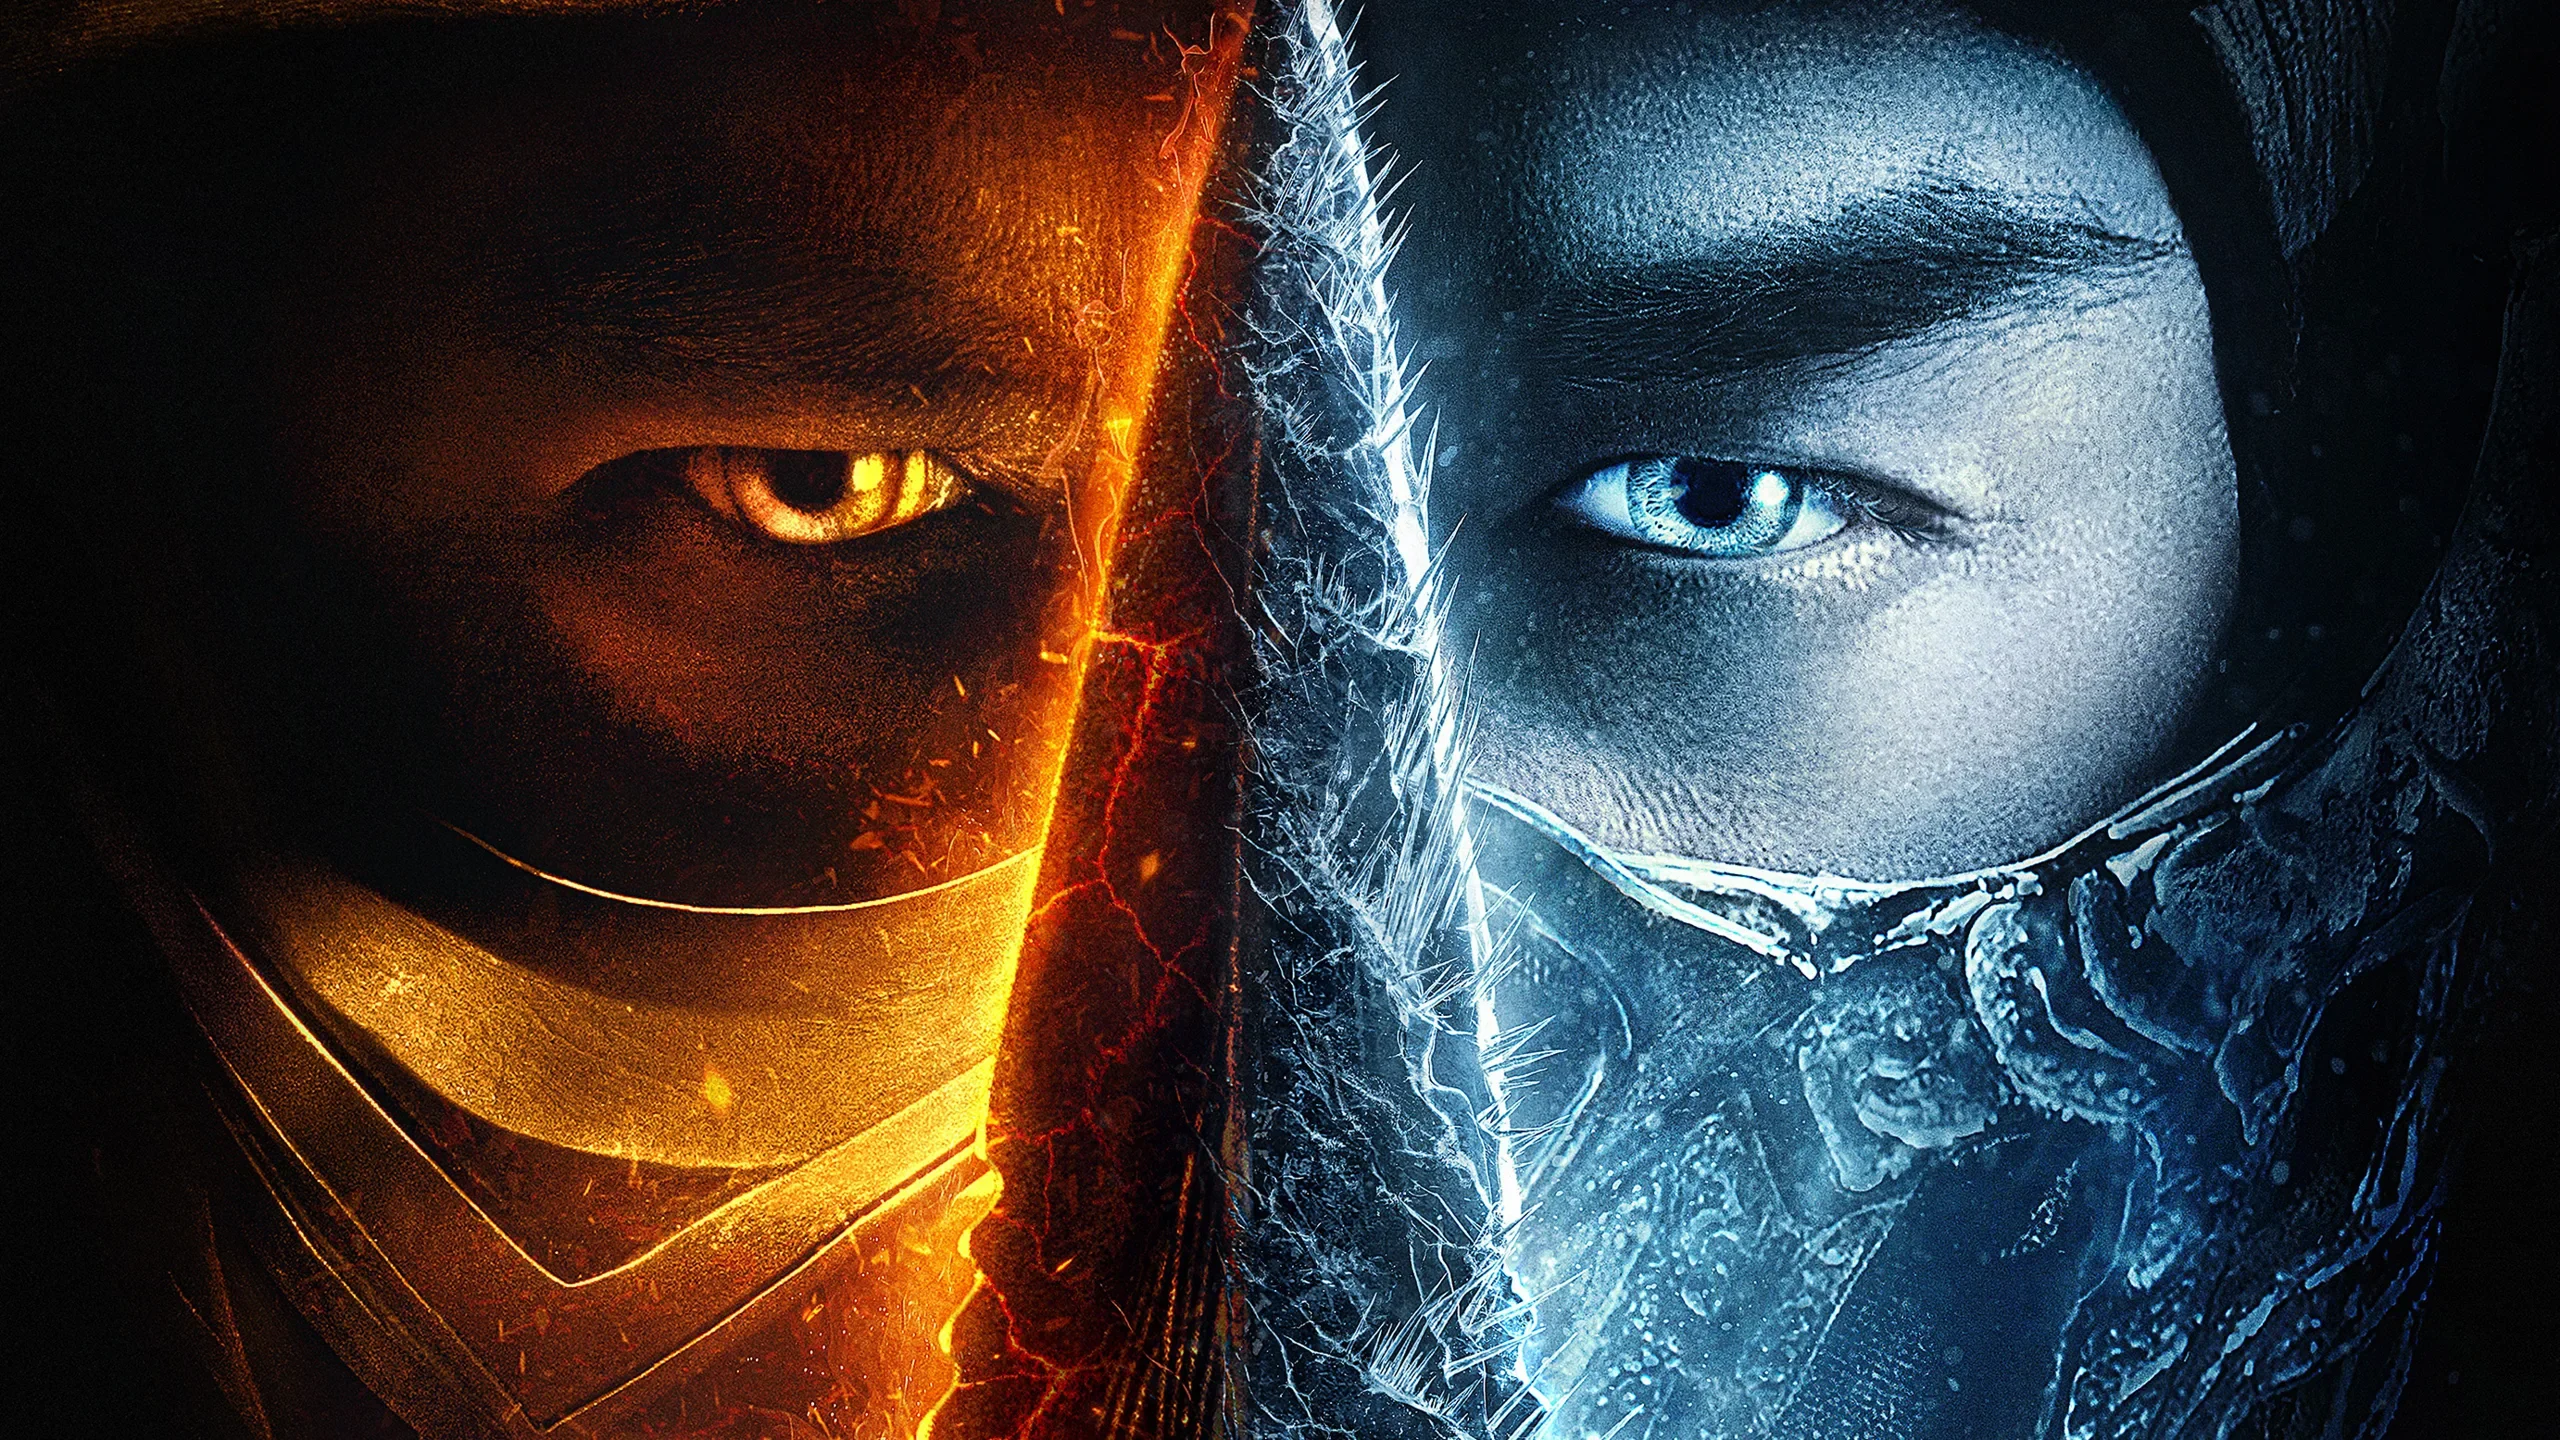 The second part of the Mortal Kombat film adaptation will have to wait